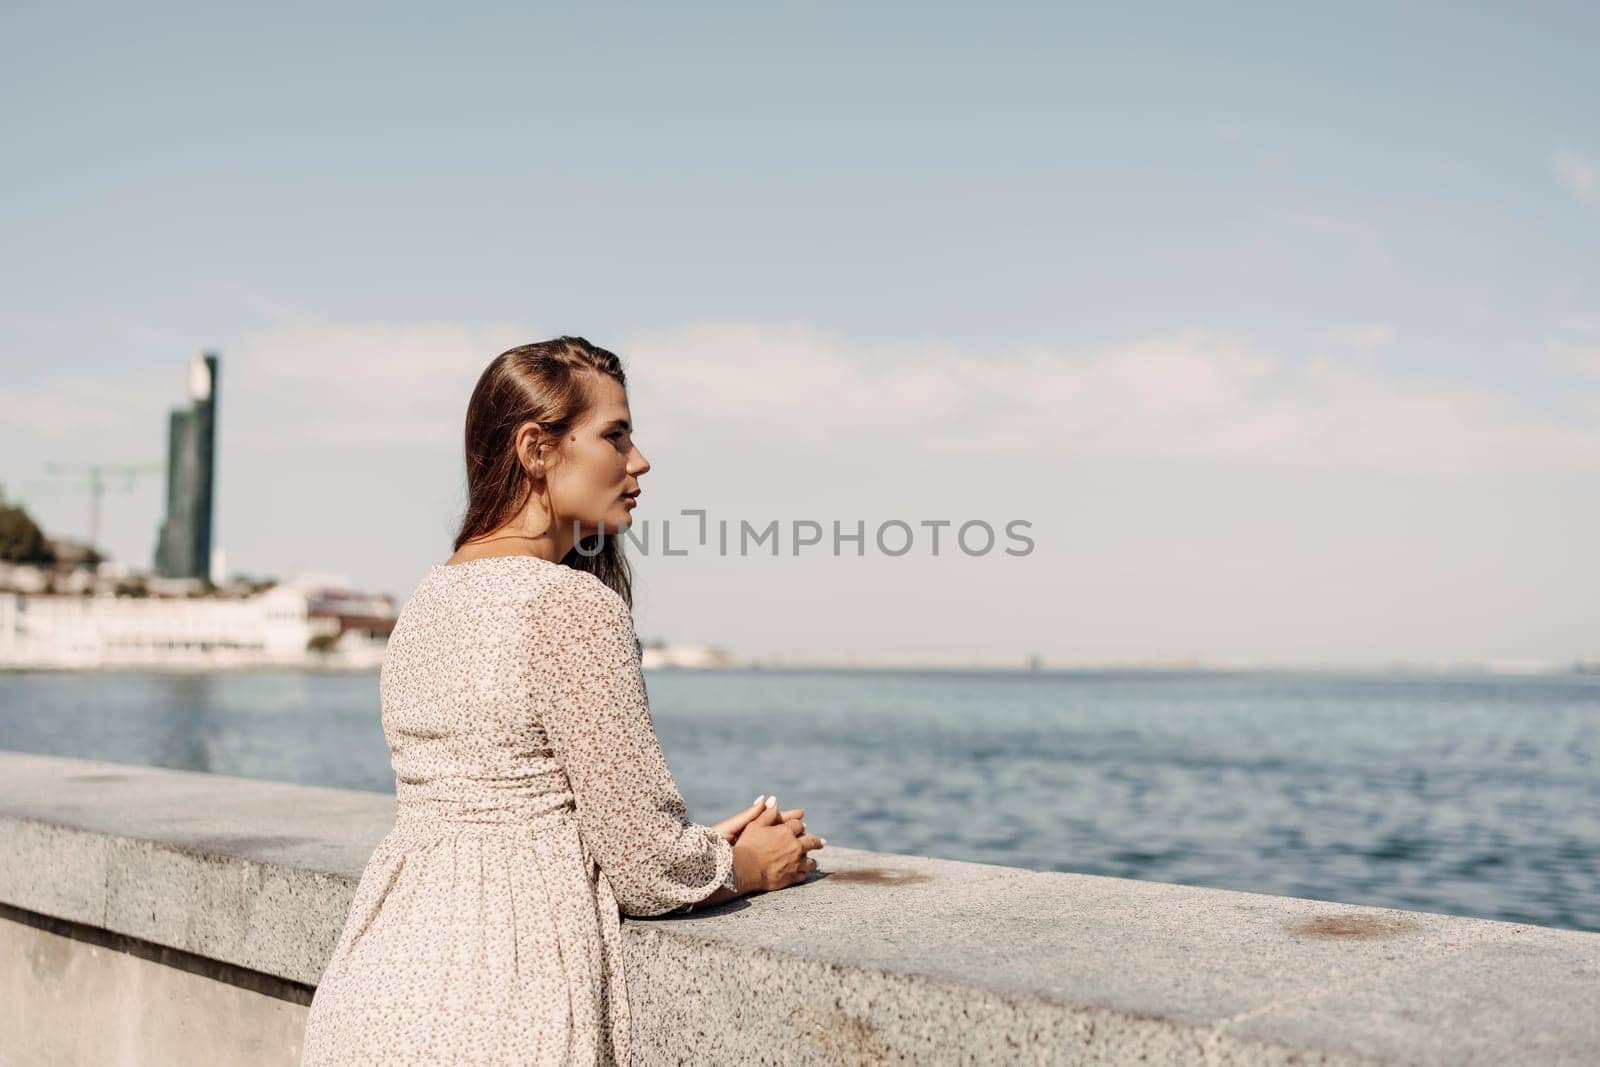 woman stands on a ledge overlooking the ocean. She is wearing a white dress and has her hands on her hips. The scene is peaceful and serene, with the water and sky providing a calming backdrop by Matiunina